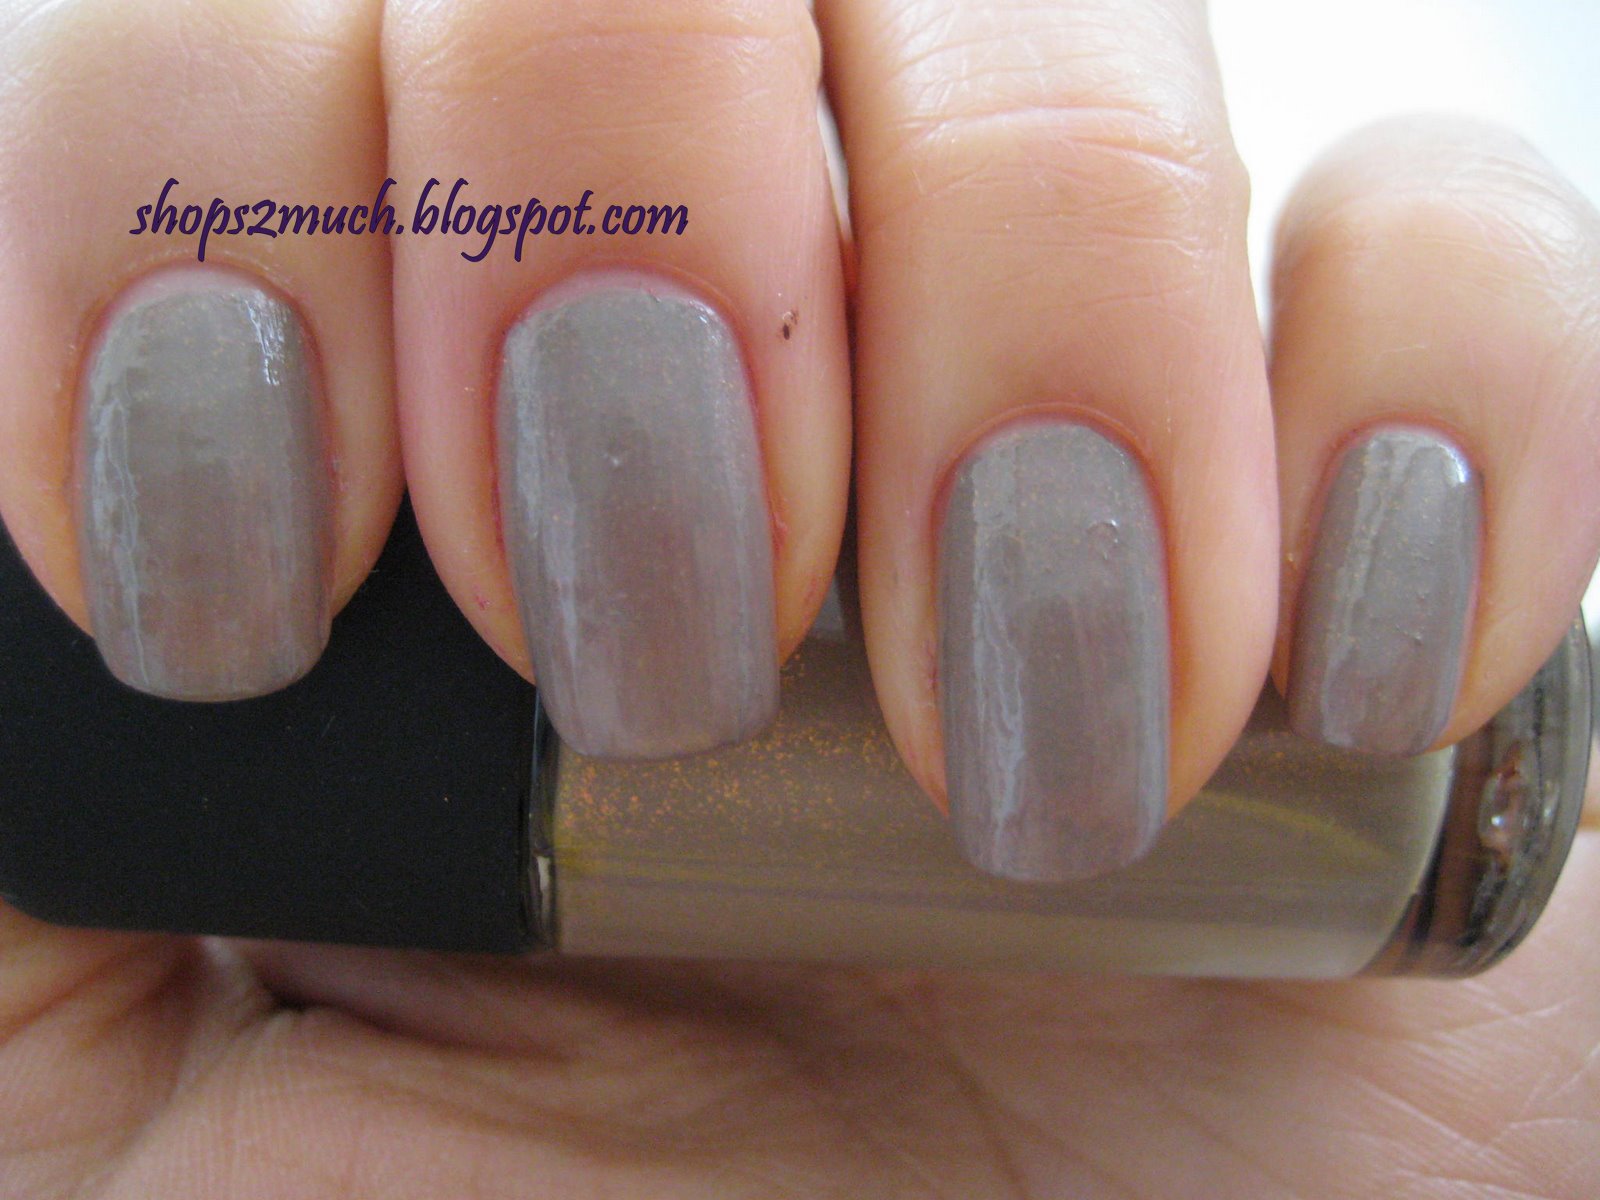 MAC Earthly Harmony is another nail lacquer from the MAC Nail Trend Fall